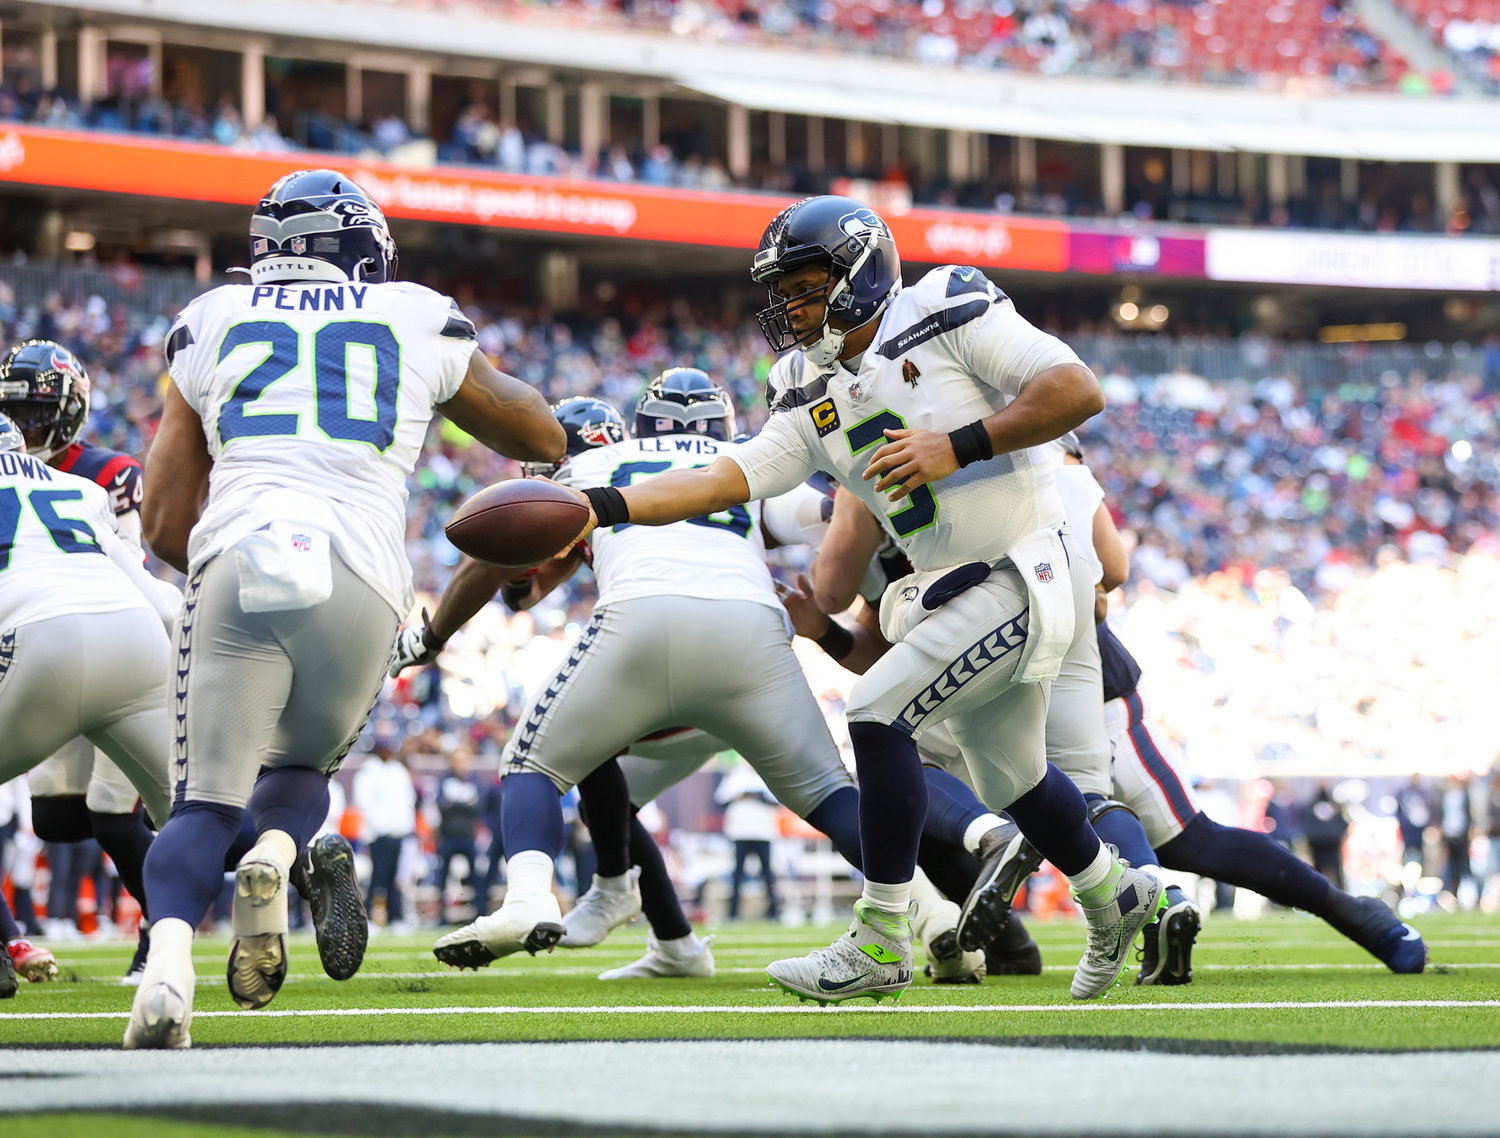 Seattle Seahawks quarterback Russell Wilson (3) hands the ball off to running back Rashaad Penny (20) in his own end zone during the first half of an NFL game between the Seahawks and the Texans on December 12, 2021 in Houston, Texas.